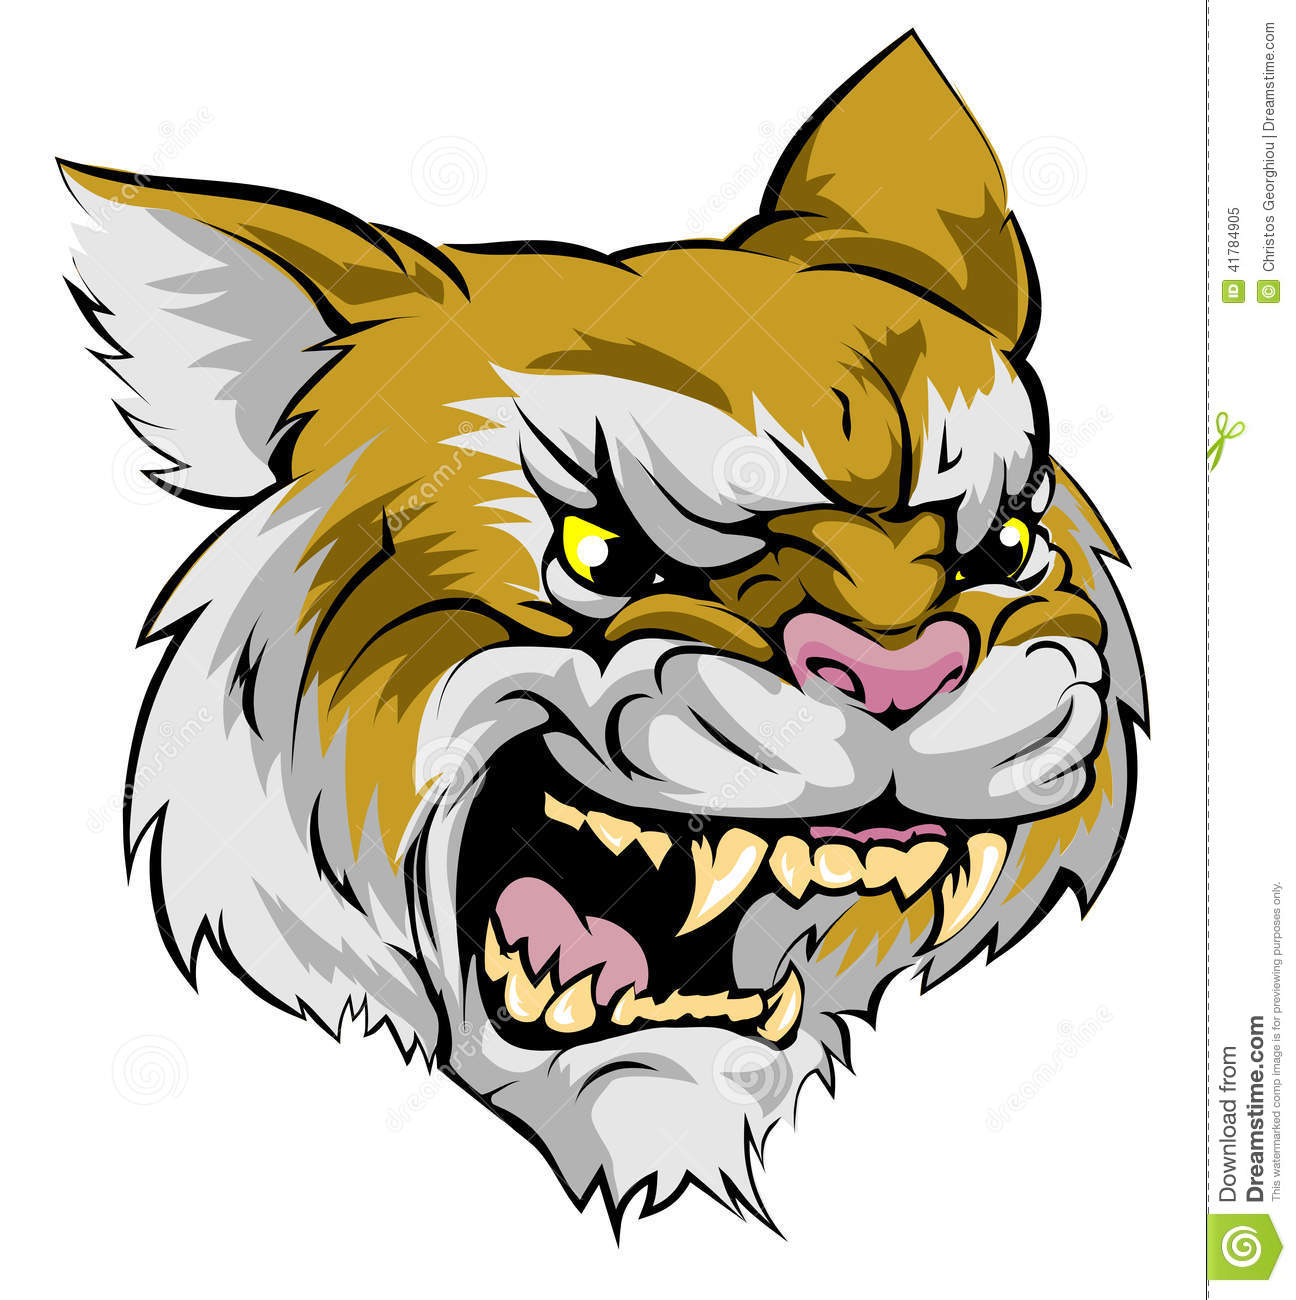 An Illustration Of A Fierce Wildcat Animal Character Or Sports Mascot